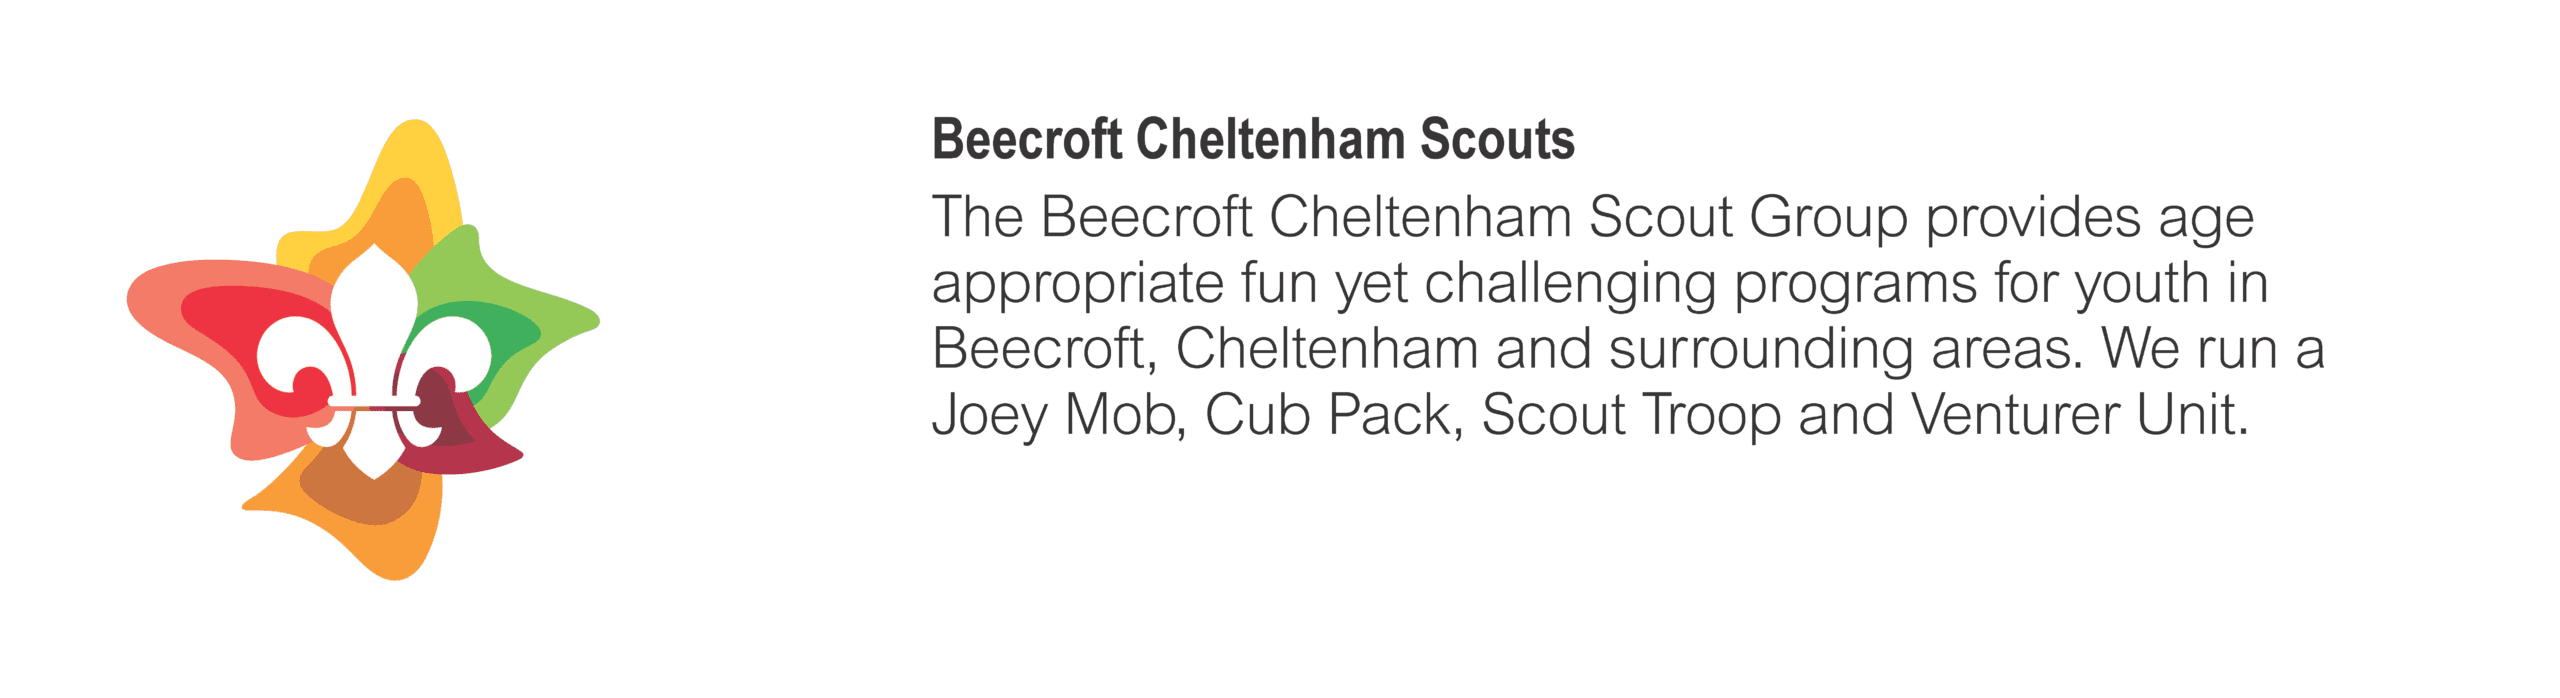 Charity_Beecroft Scouts_colour